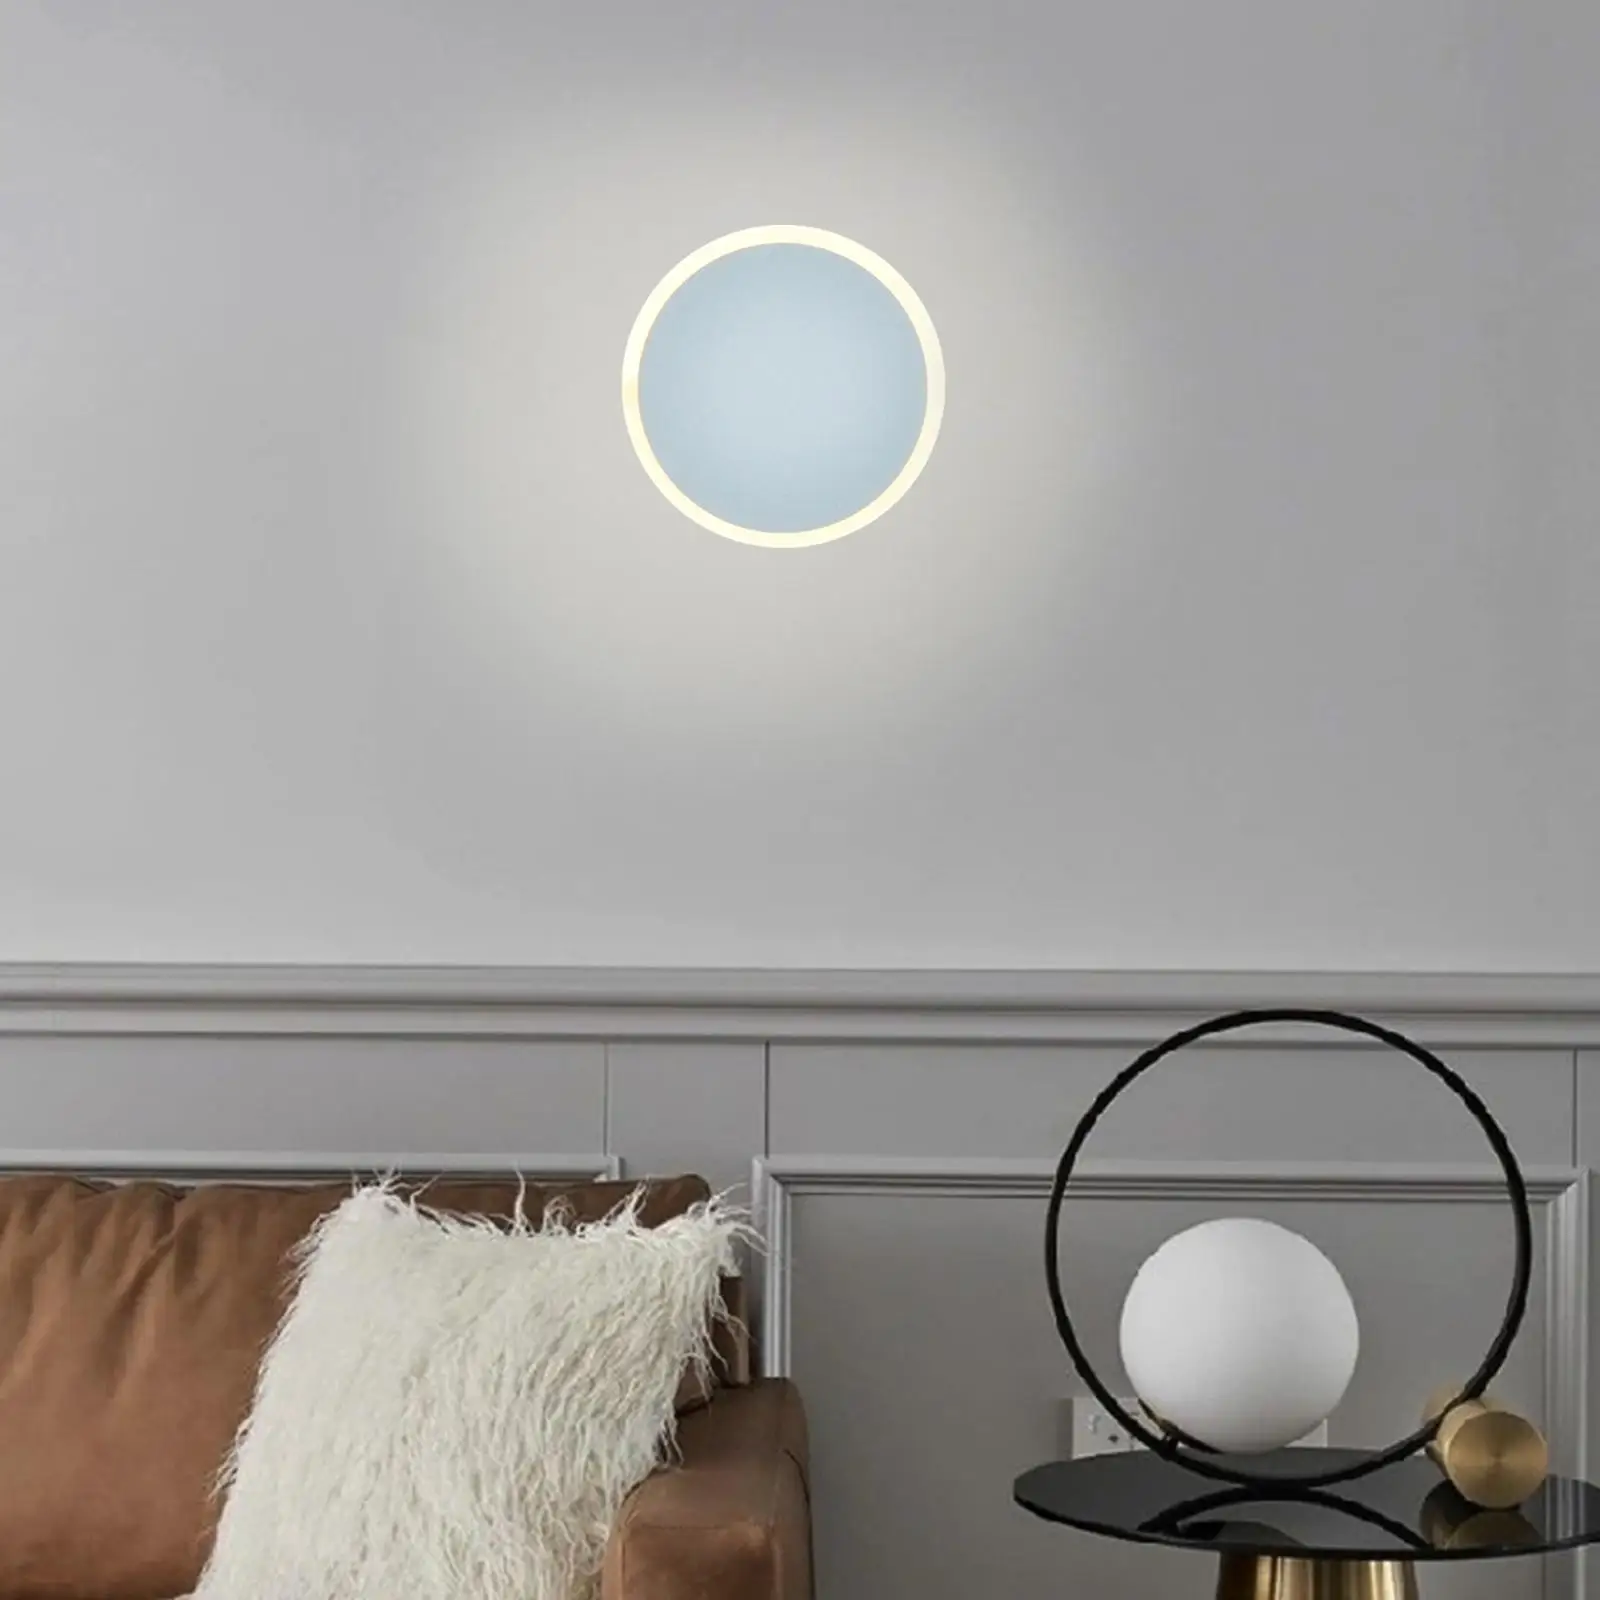 LED Wall Light Fixtures Brightness Adjustable Wall Art Decor Round Wall Sconce for Kitchen Farmhouse Loft Indoor NightStand